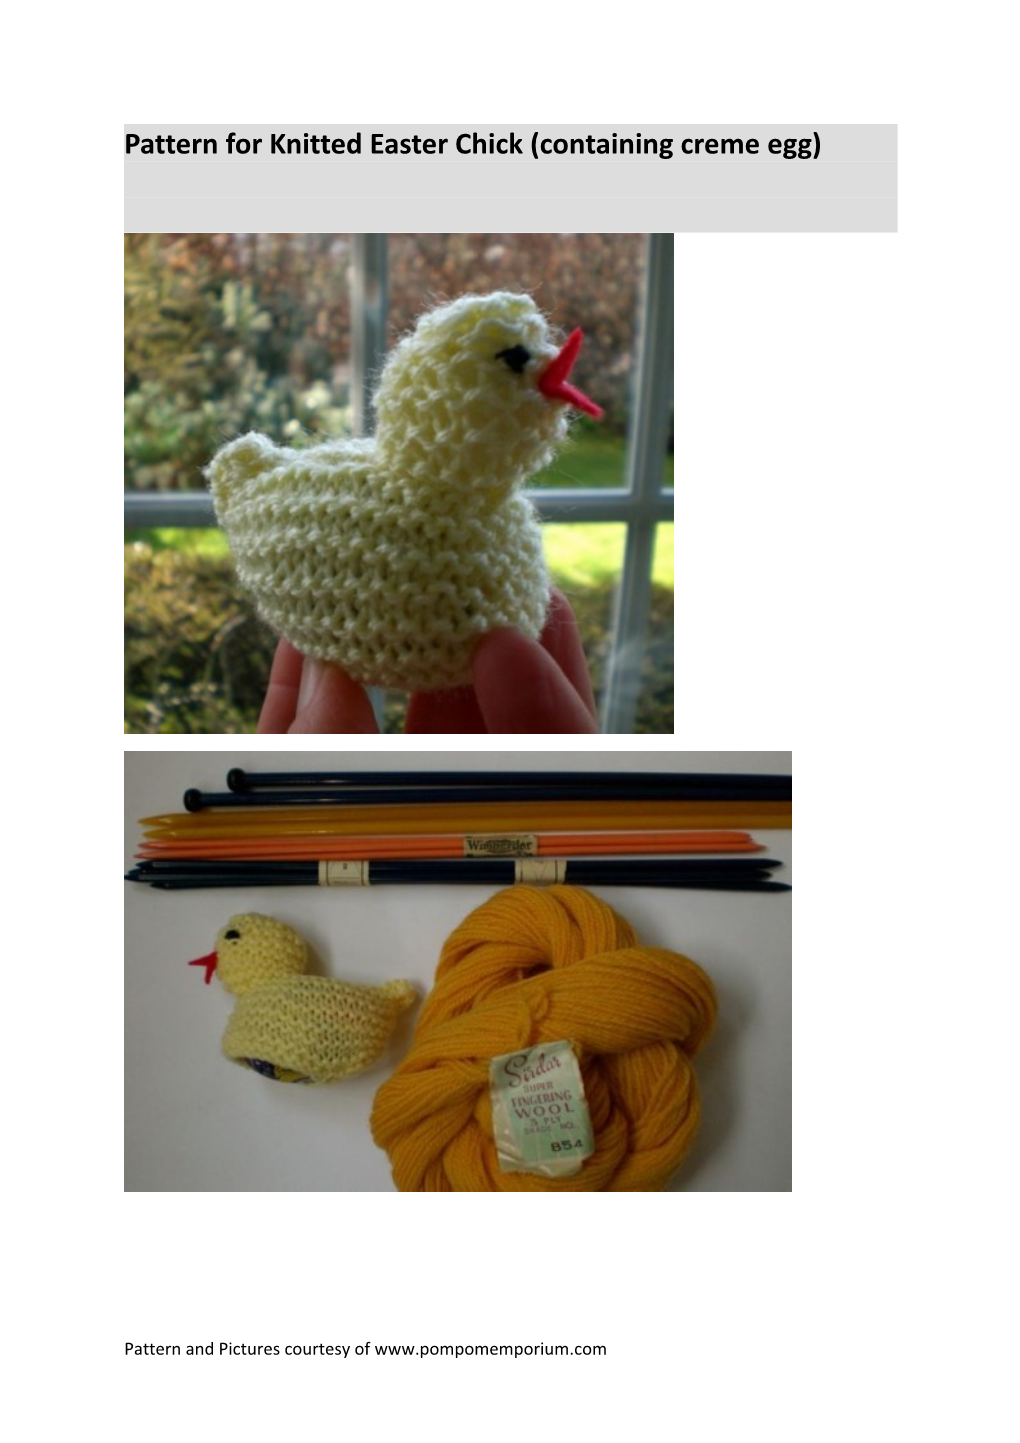 Pattern for Knitted Easter Chick (Containing Creme Egg)